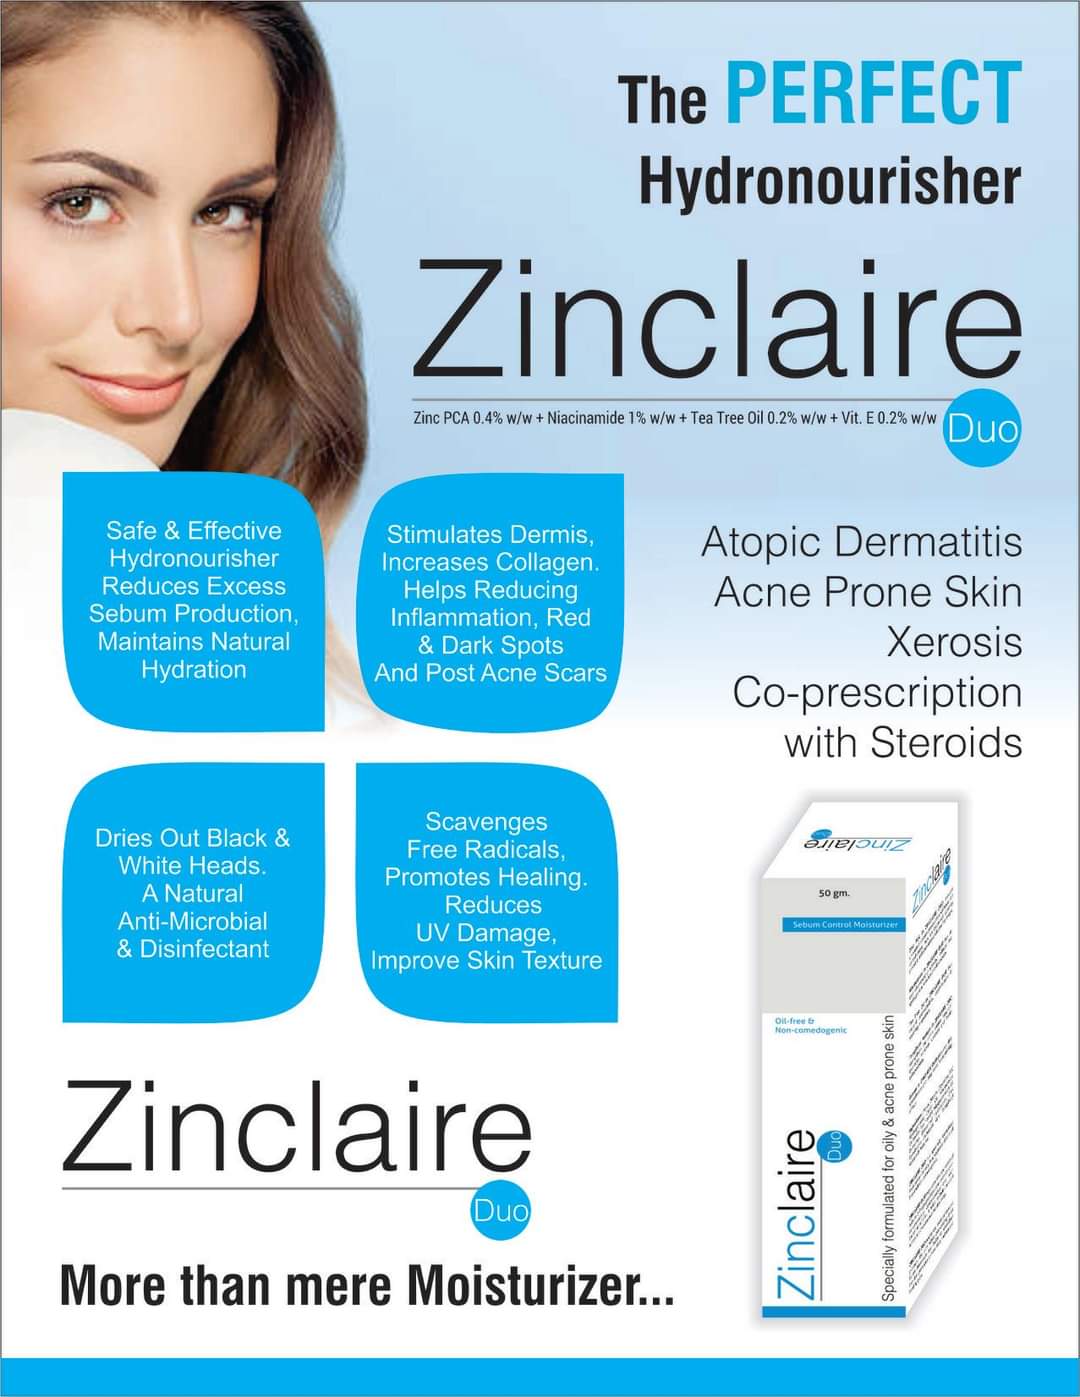 Zinclaire Control Moisturizer and acne Cream by DREAMAX